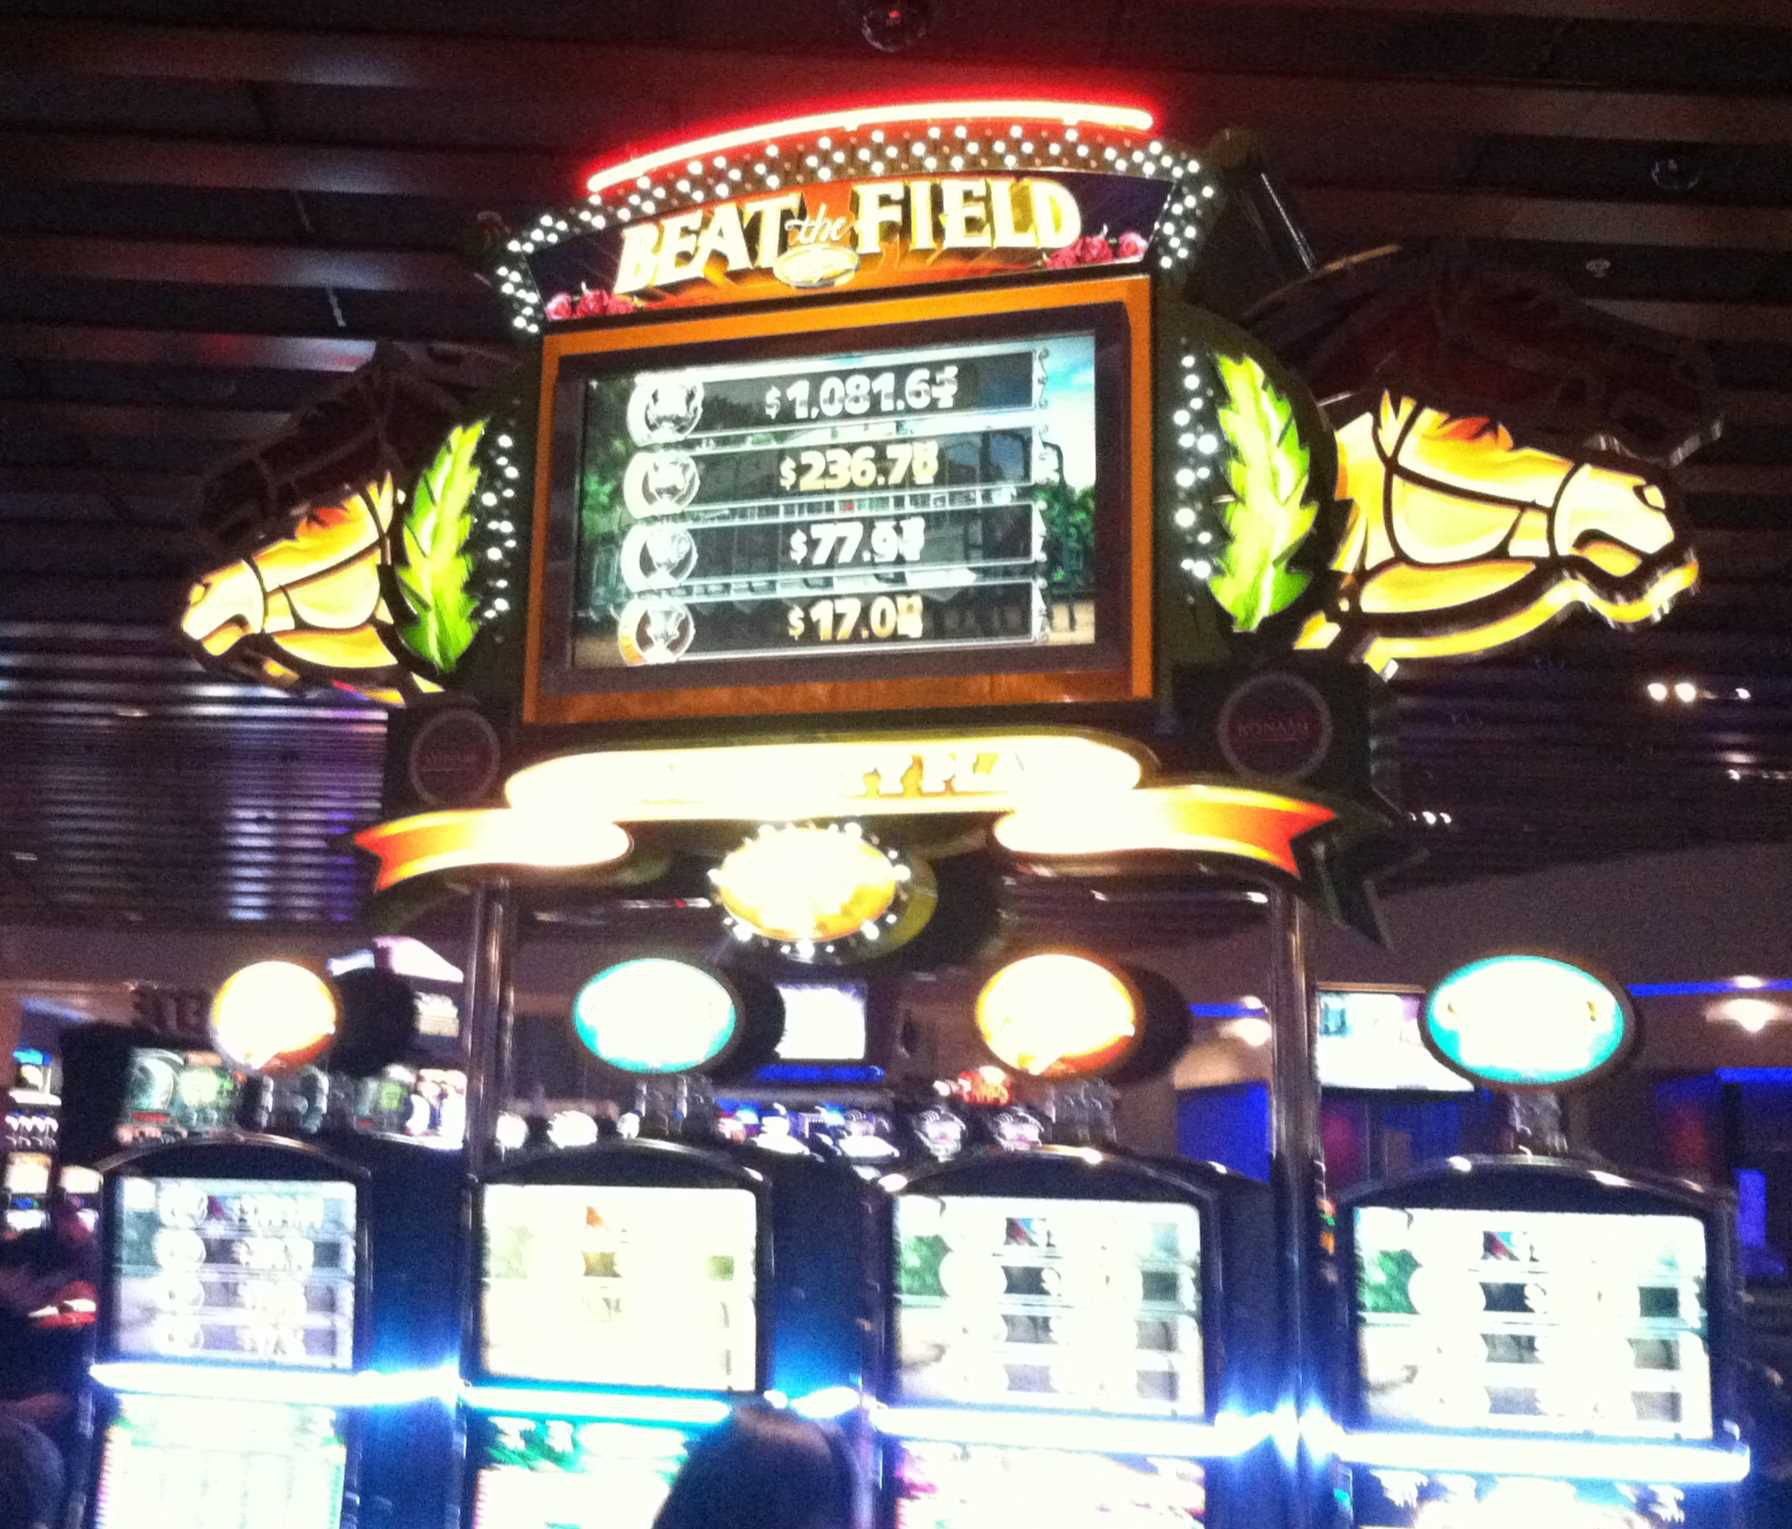 loose slot machines at boomtown casino